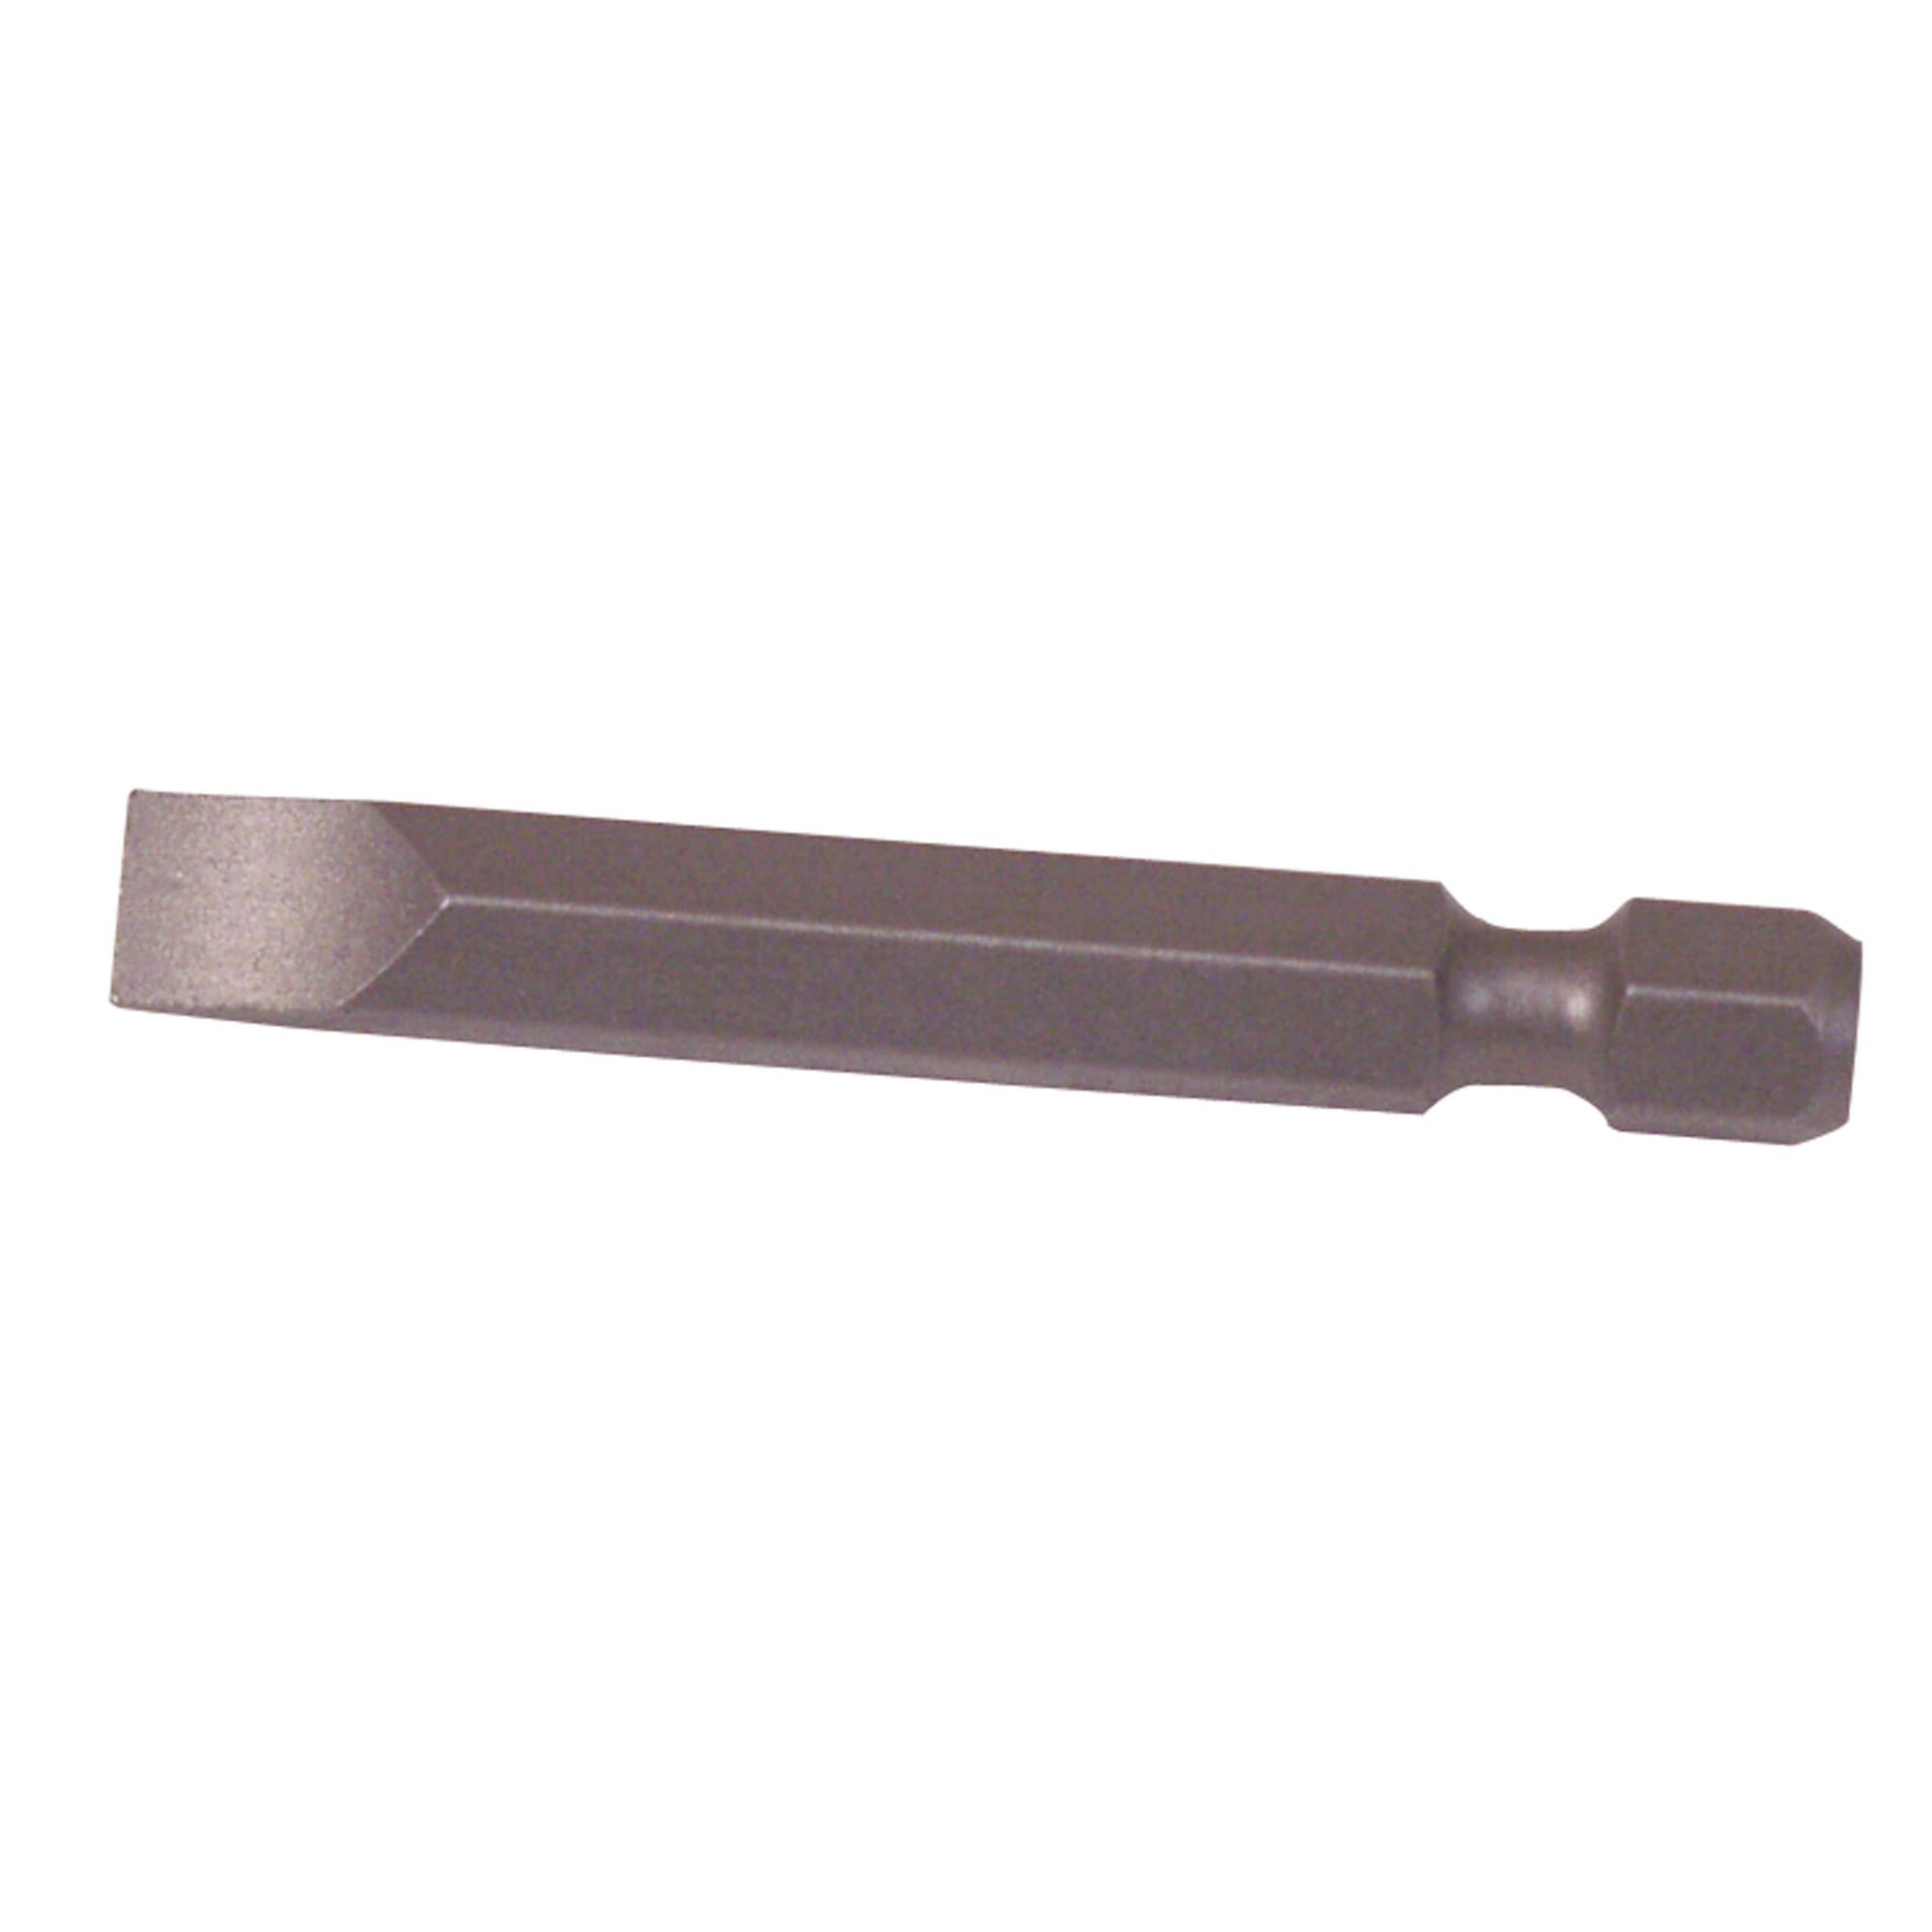 AP Products 009-20-8S Slotted Power Bit - 8F-10R, 1/4" x 2"